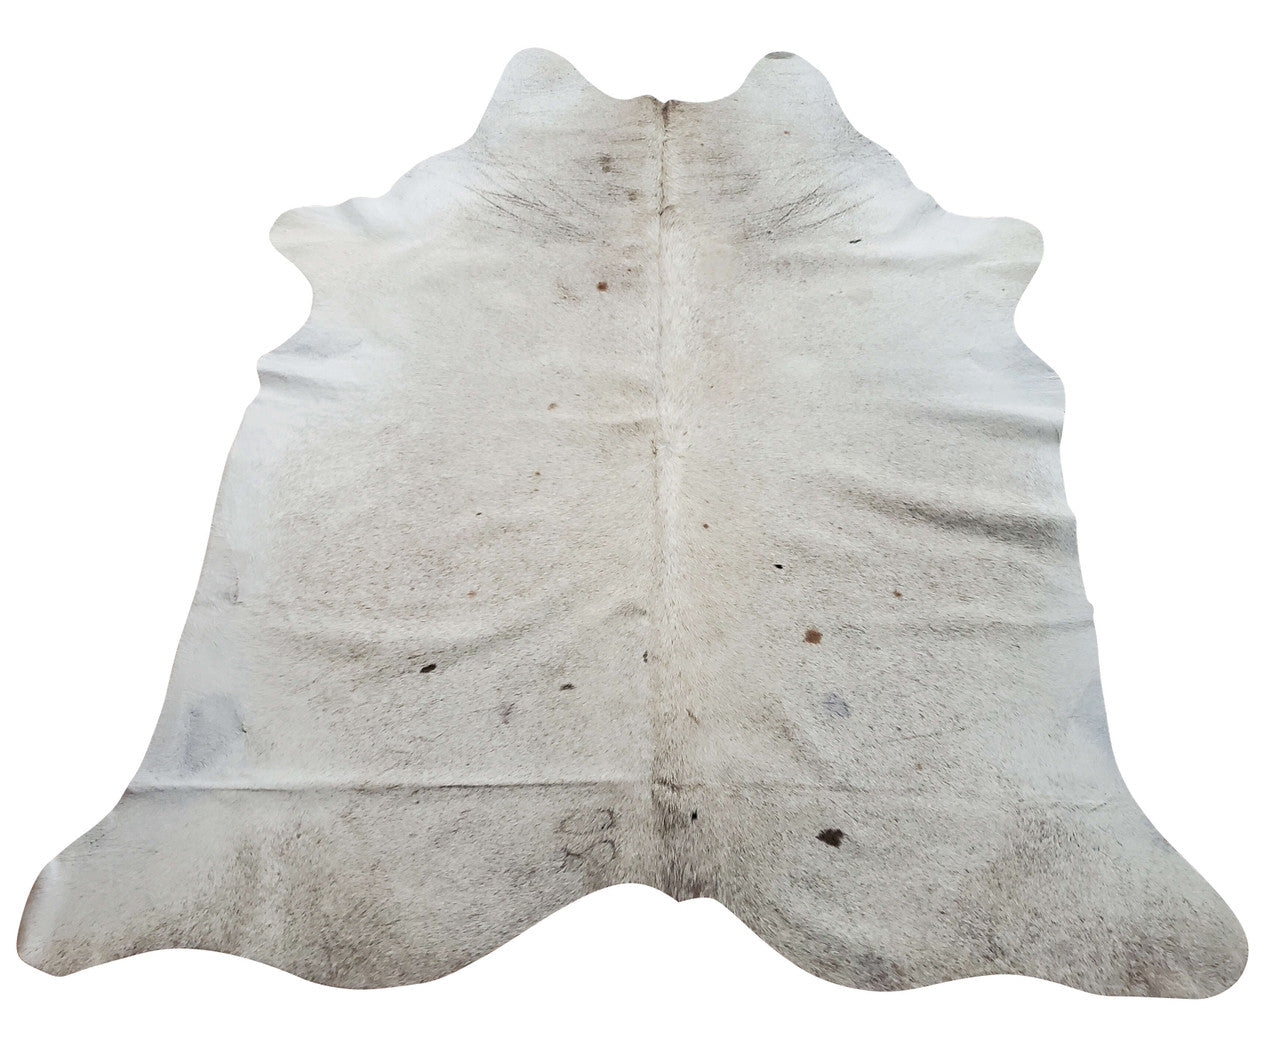 This cowhide is impressive. It is a great accent piece and an excellent price! Looks great in my home office, entryway and in front of my fireplace.
